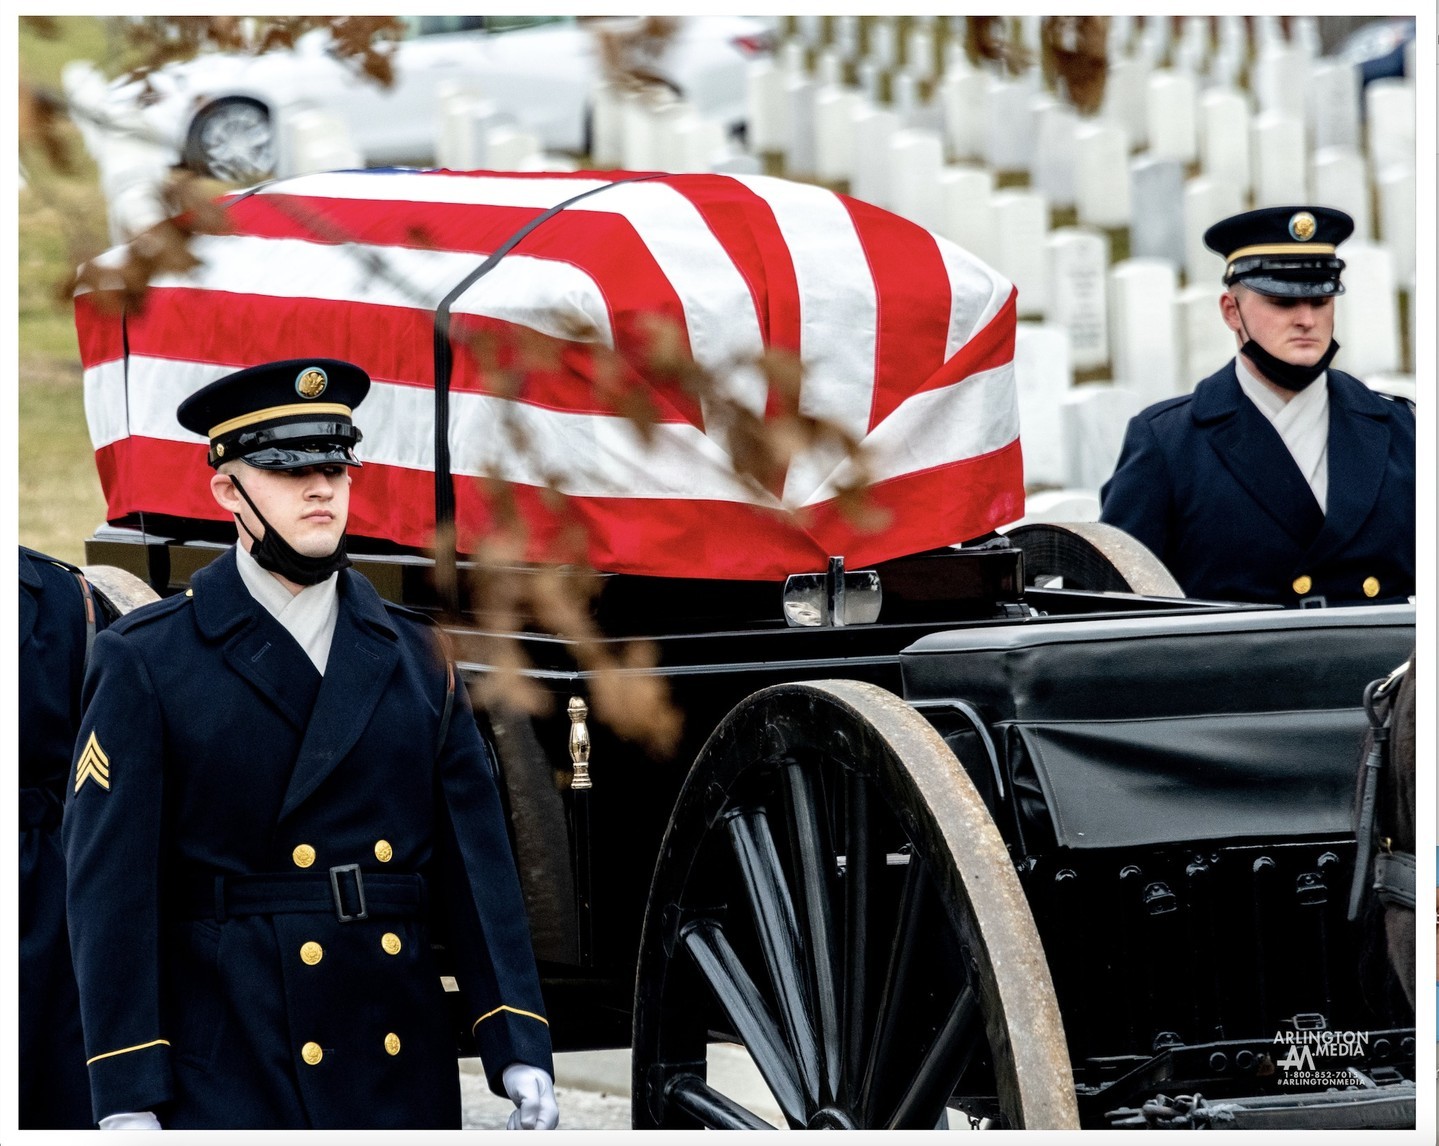 American flags have been draped over military veterans' coffins since the Napoleonic Wars in the late 1700s and early 1800s.  The custom is rich with tradition and requires a certain protocol.

Flags draped over coffins honor the memory of military members who serve the United States, according to the U.S. Department of Veterans Affairs.  Most veterans and active-service members of the military qualify for flag-draped coffins at their funerals.  The Department of Veterans Affairs states that veterans with dishonorable discharges are not eligible for an official burial flag.

Burial flags should never touch the ground, and when being used to drape a coffin, should never be lowered into the grave.  The flag should be removed from the casket and folded into a triangle with only the union, or the blue field, showing.  It will then be given to the deceased's next of kin, friend or specified dependent.